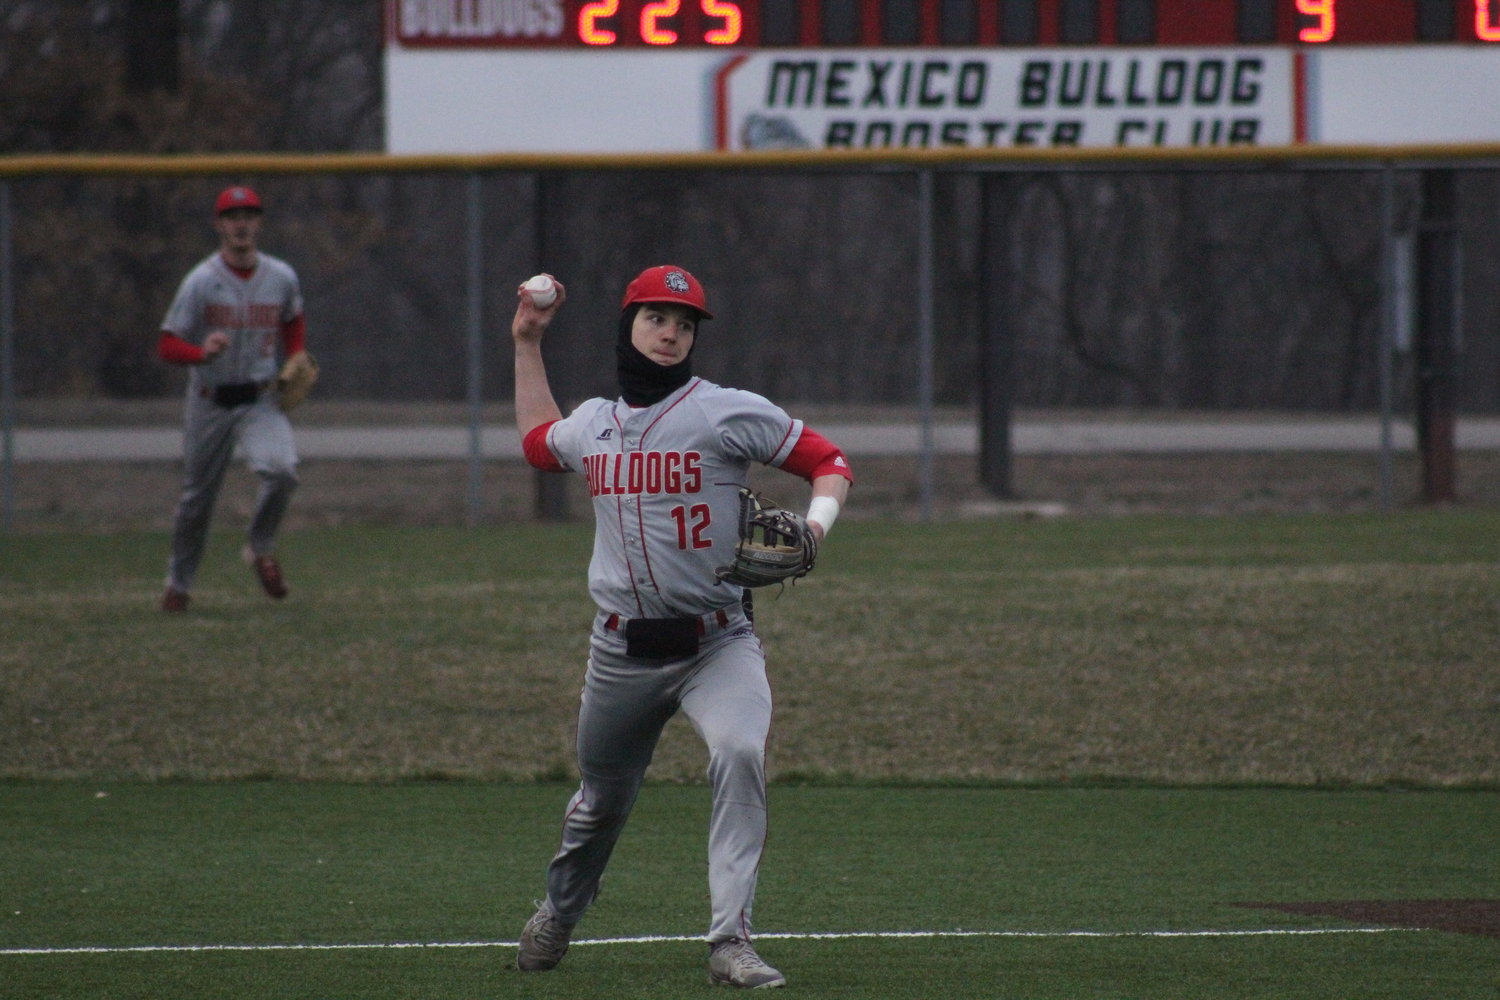 Mexico senior Andrew Runge makes a throw to record an out against Marshall on Thursday at home. Runge finished with two hits and an RBI in the victory.